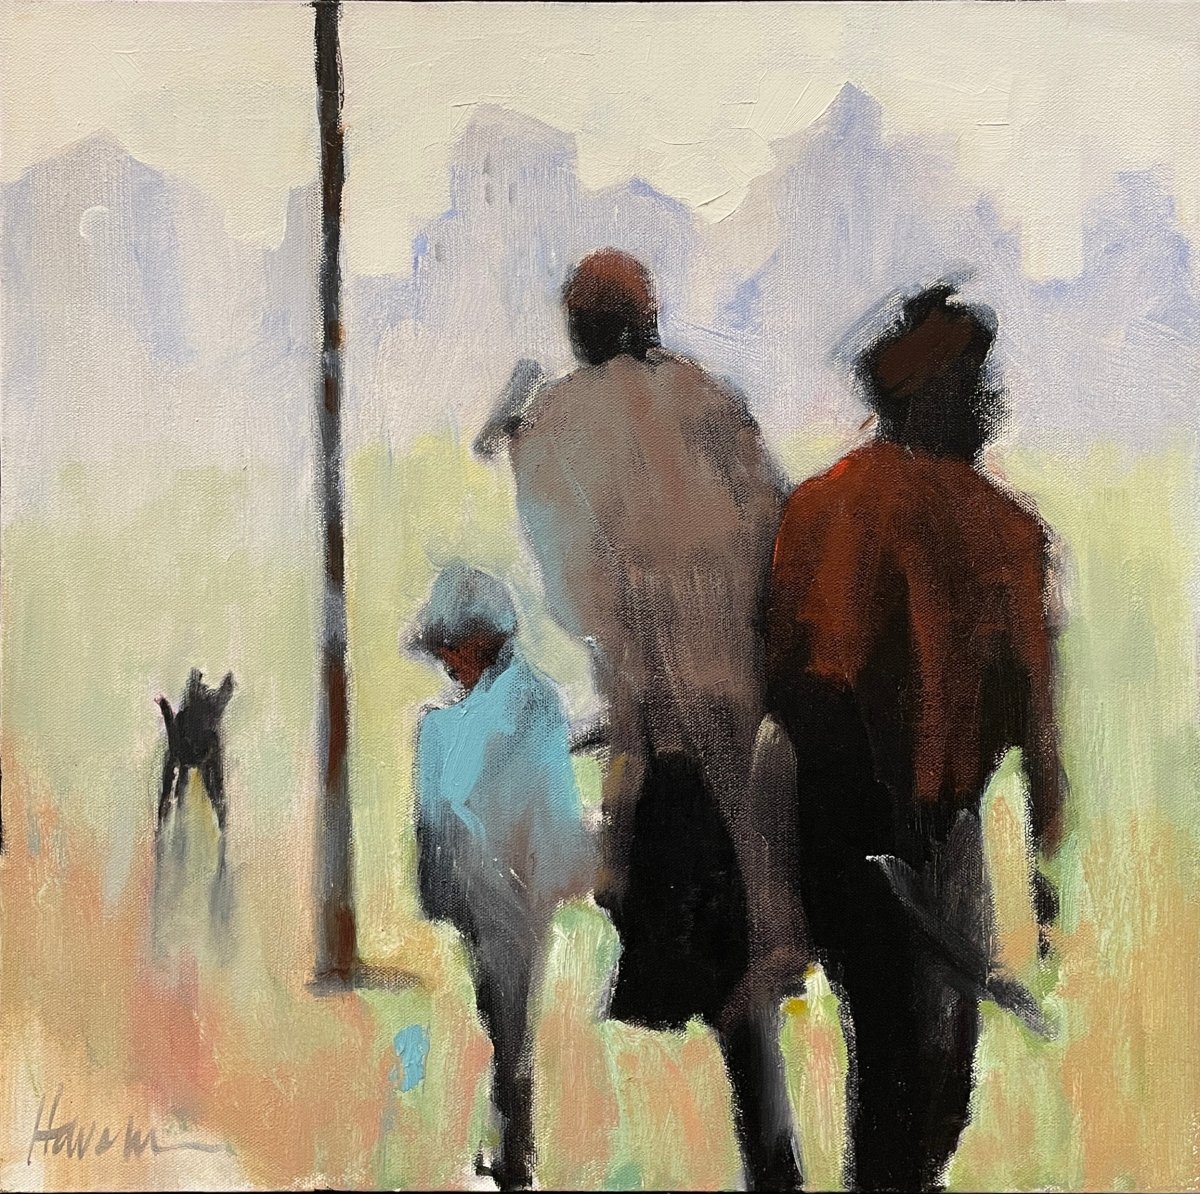 With My Aunt and Uncle by Betsy Havens at LePrince Galleries